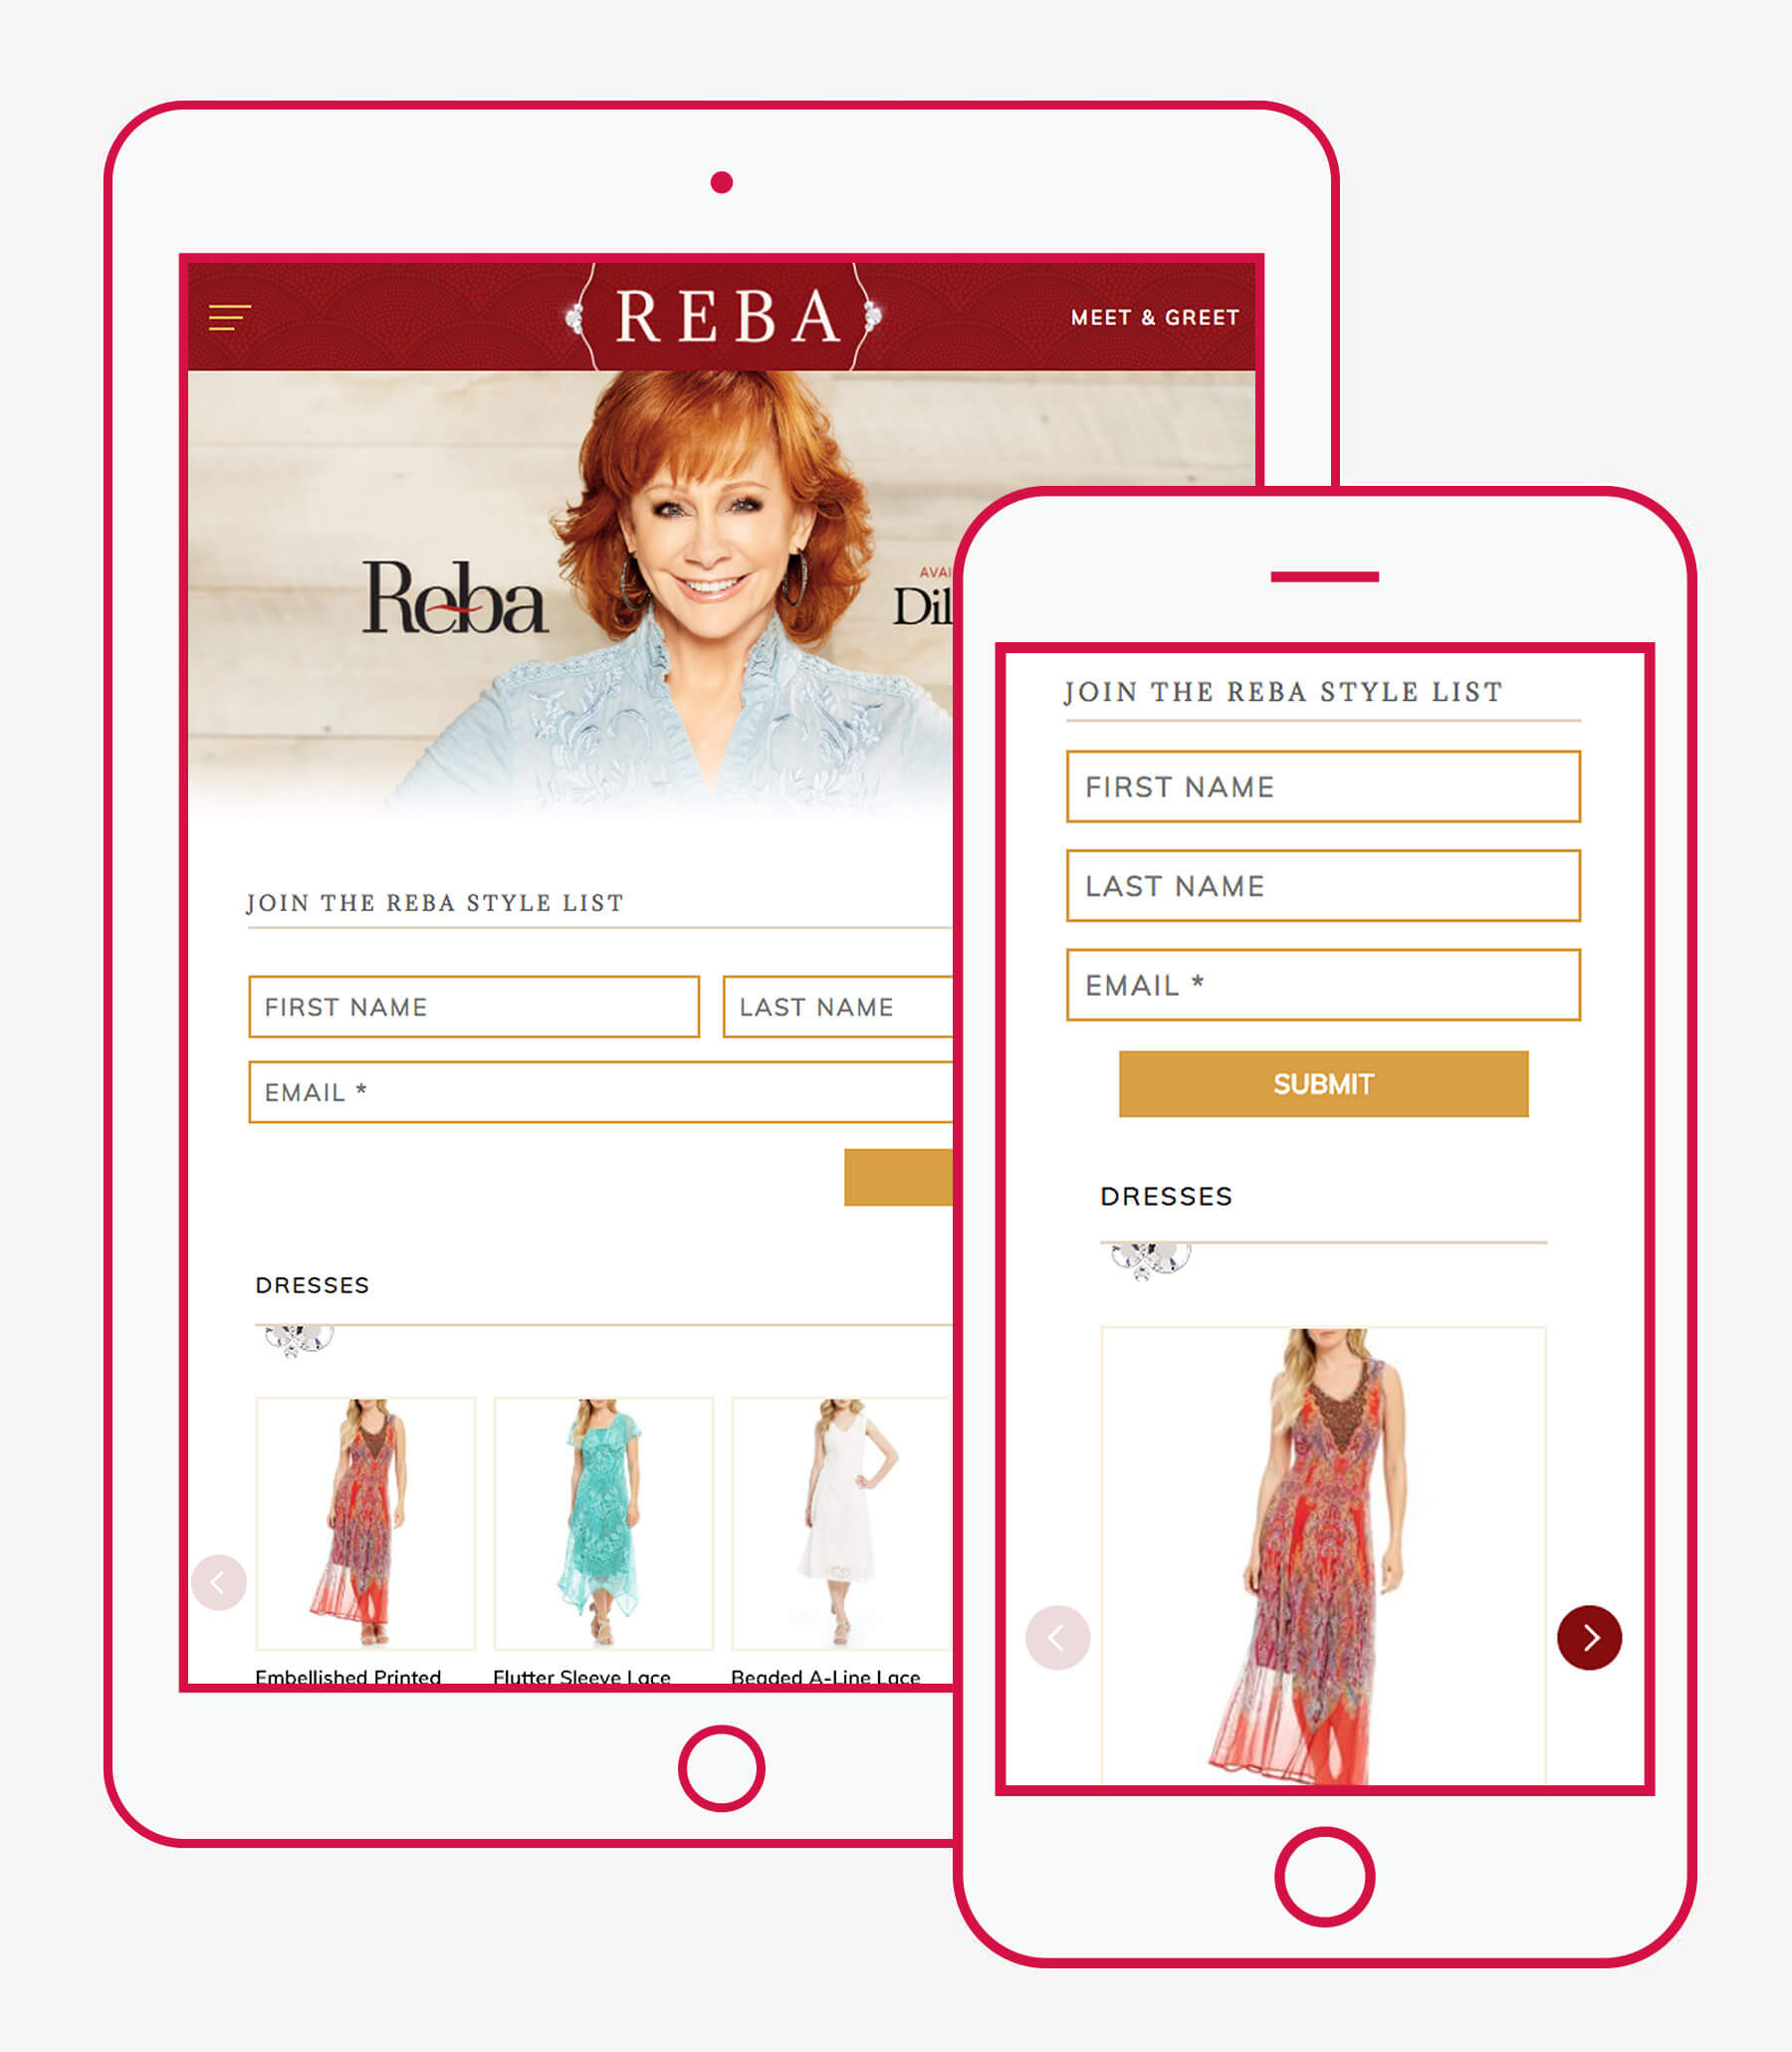 Table and Mobile images of the Reba Style page.